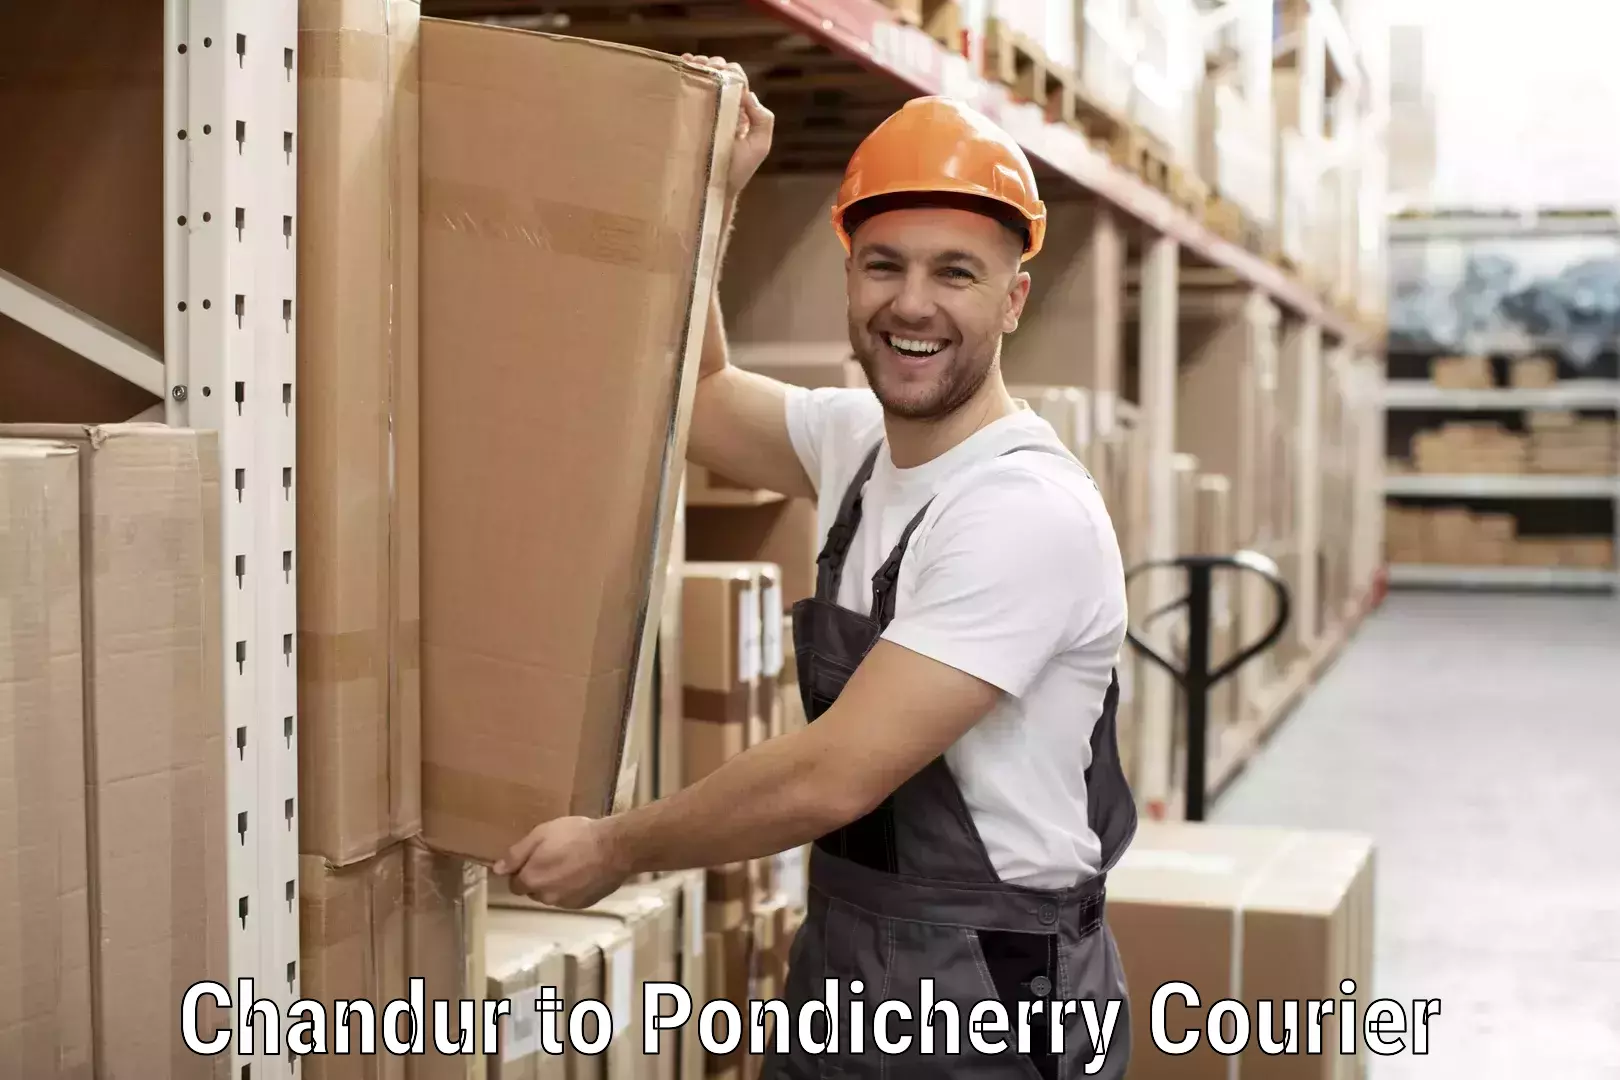 Subscription-based courier Chandur to Pondicherry